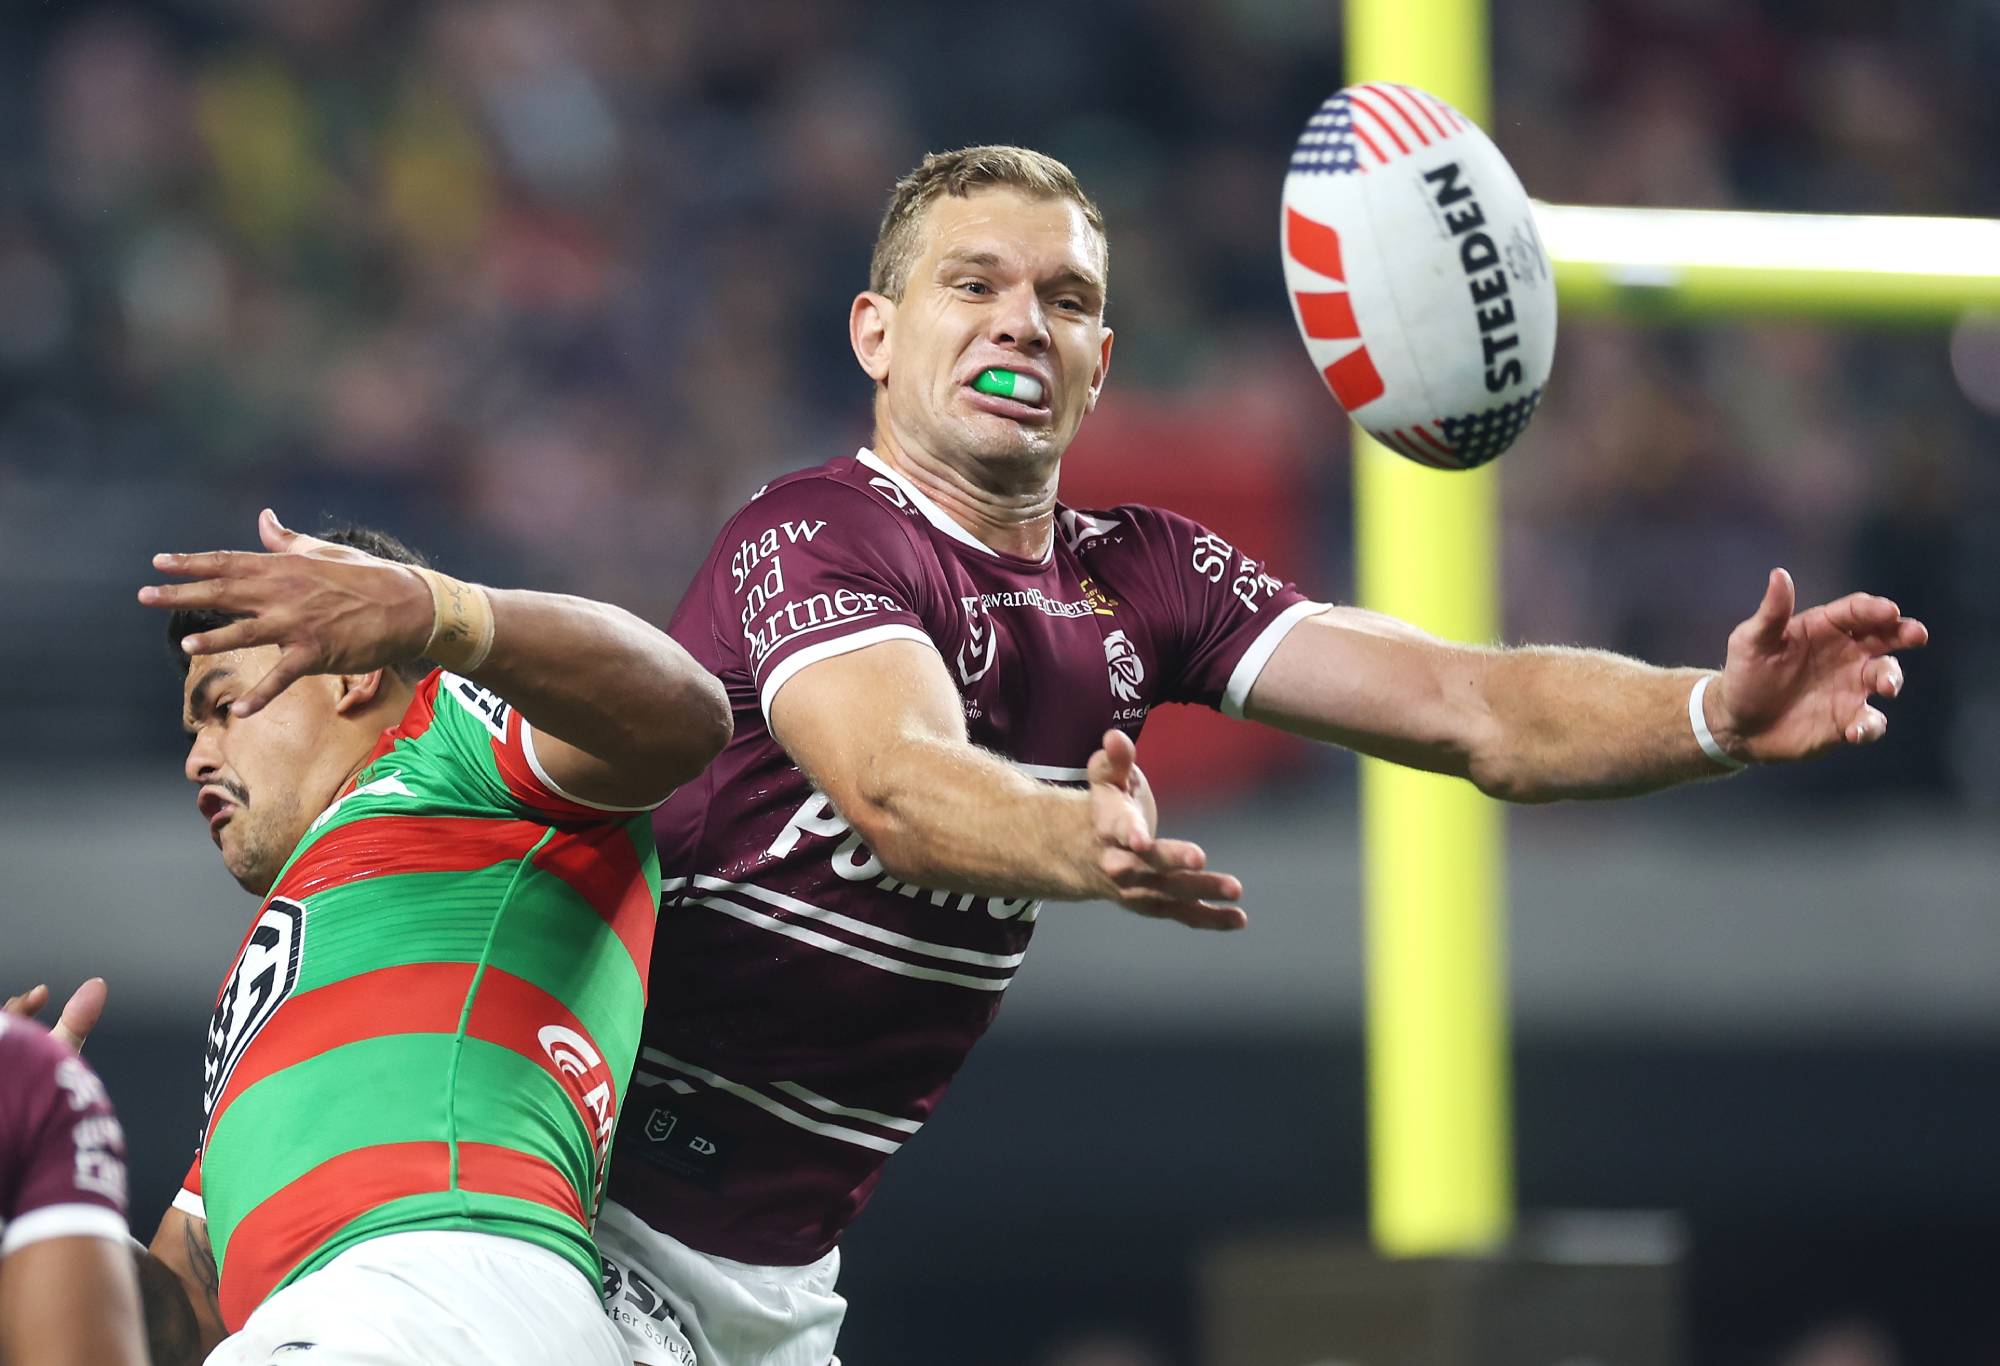 LAS VEGAS, NEVADA - MARCH 02: Latrell Mitchell of the Rabbitohs and Tom Trbojevic of the Sea Eagles compete for the ball from a kick during the round one NRL match between Manly Sea Eagles and South Sydney Rabbitohs at Allegiant Stadium, on March 02, 2024, in Las Vegas, Nevada. (Photo by Ezra Shaw/Getty Images)